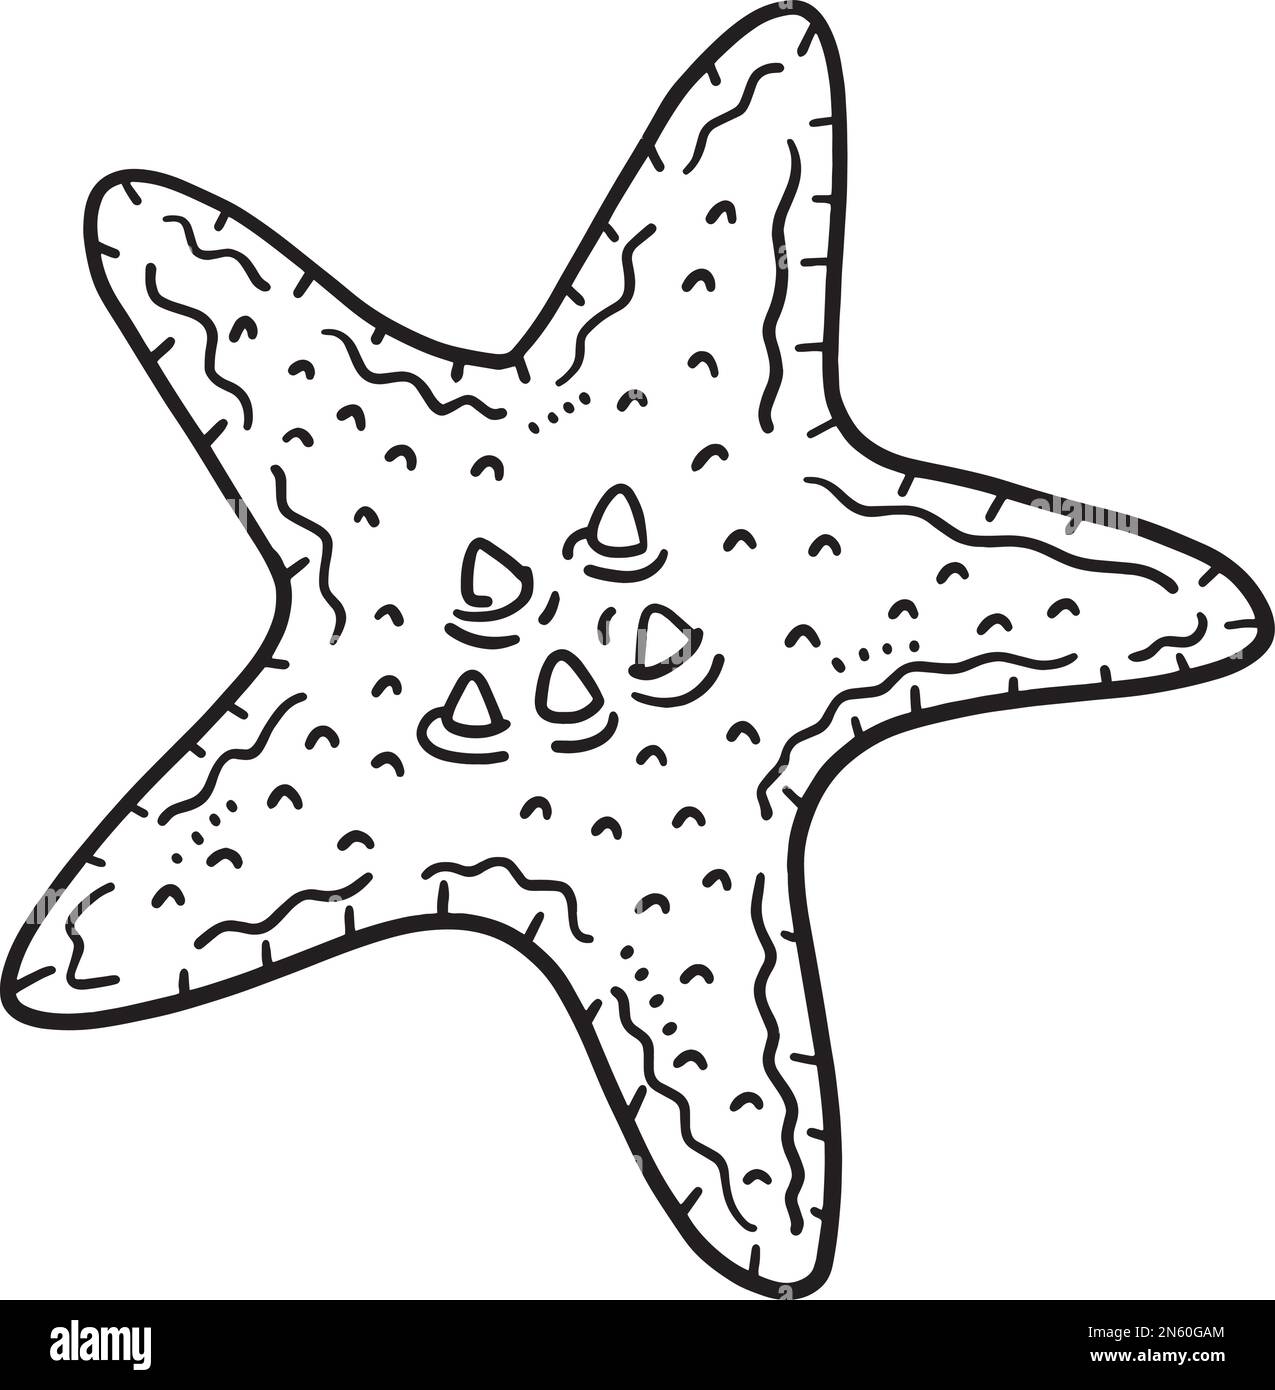 Starfish drawing black and white stock photos images